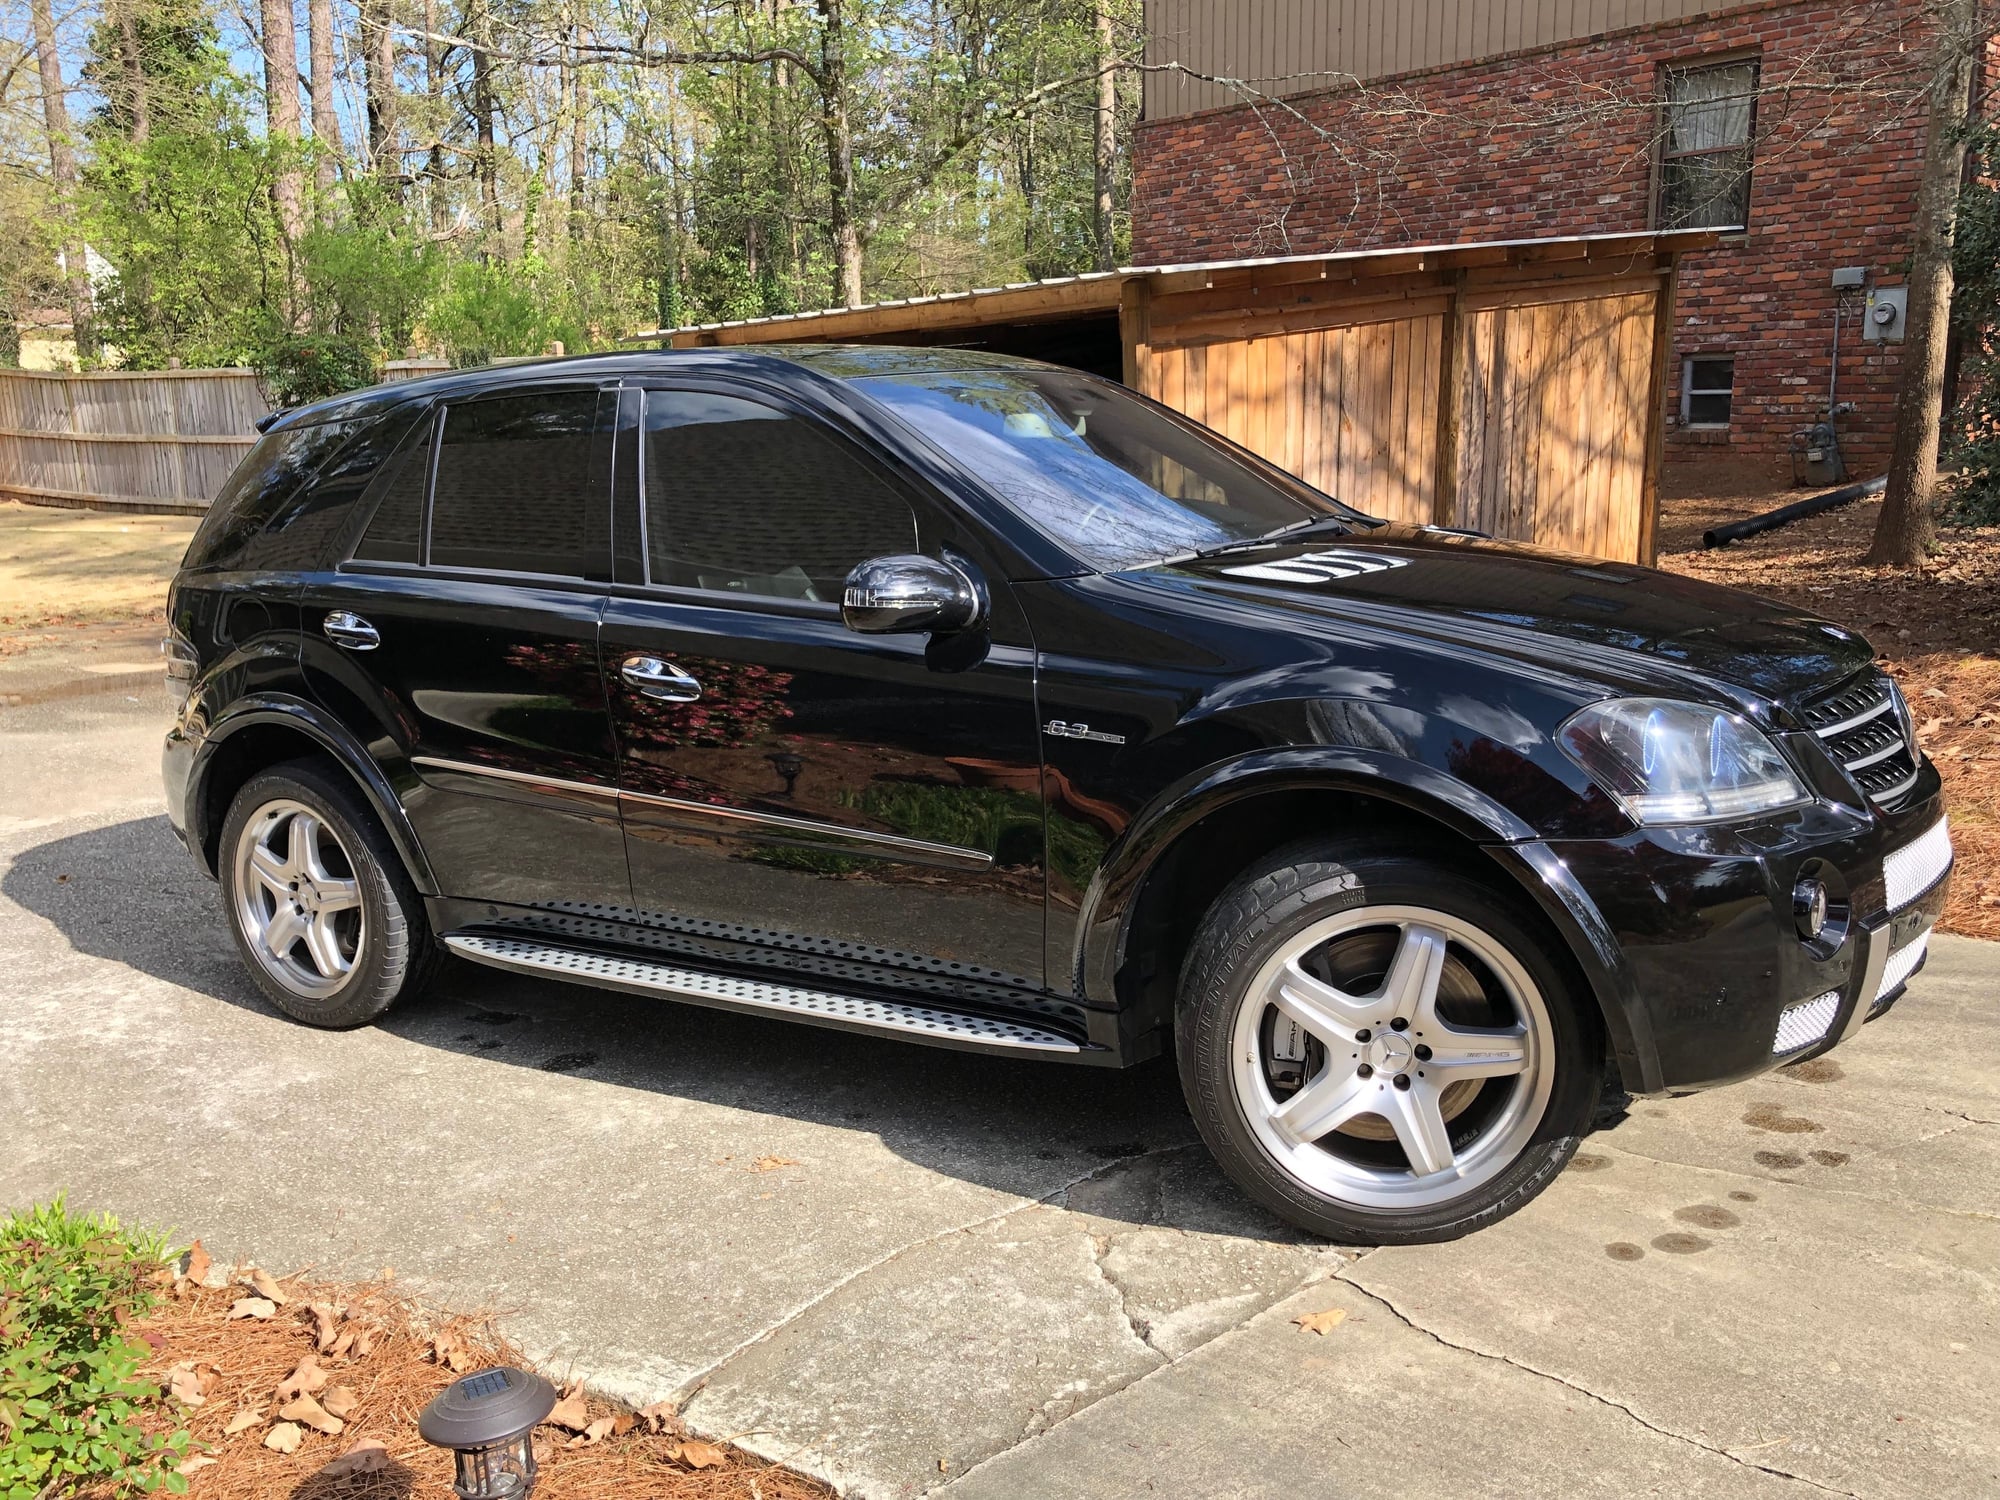 2008 Mercedes-Benz ML63 AMG - 2008 ML63 AMG 82k Very Clean, Stock, Never abused, Adult owned. - Used - VIN 4JGBB77E88a359532 - 82,000 Miles - 8 cyl - AWD - Automatic - SUV - Black - Atlanta, GA 30308, United States